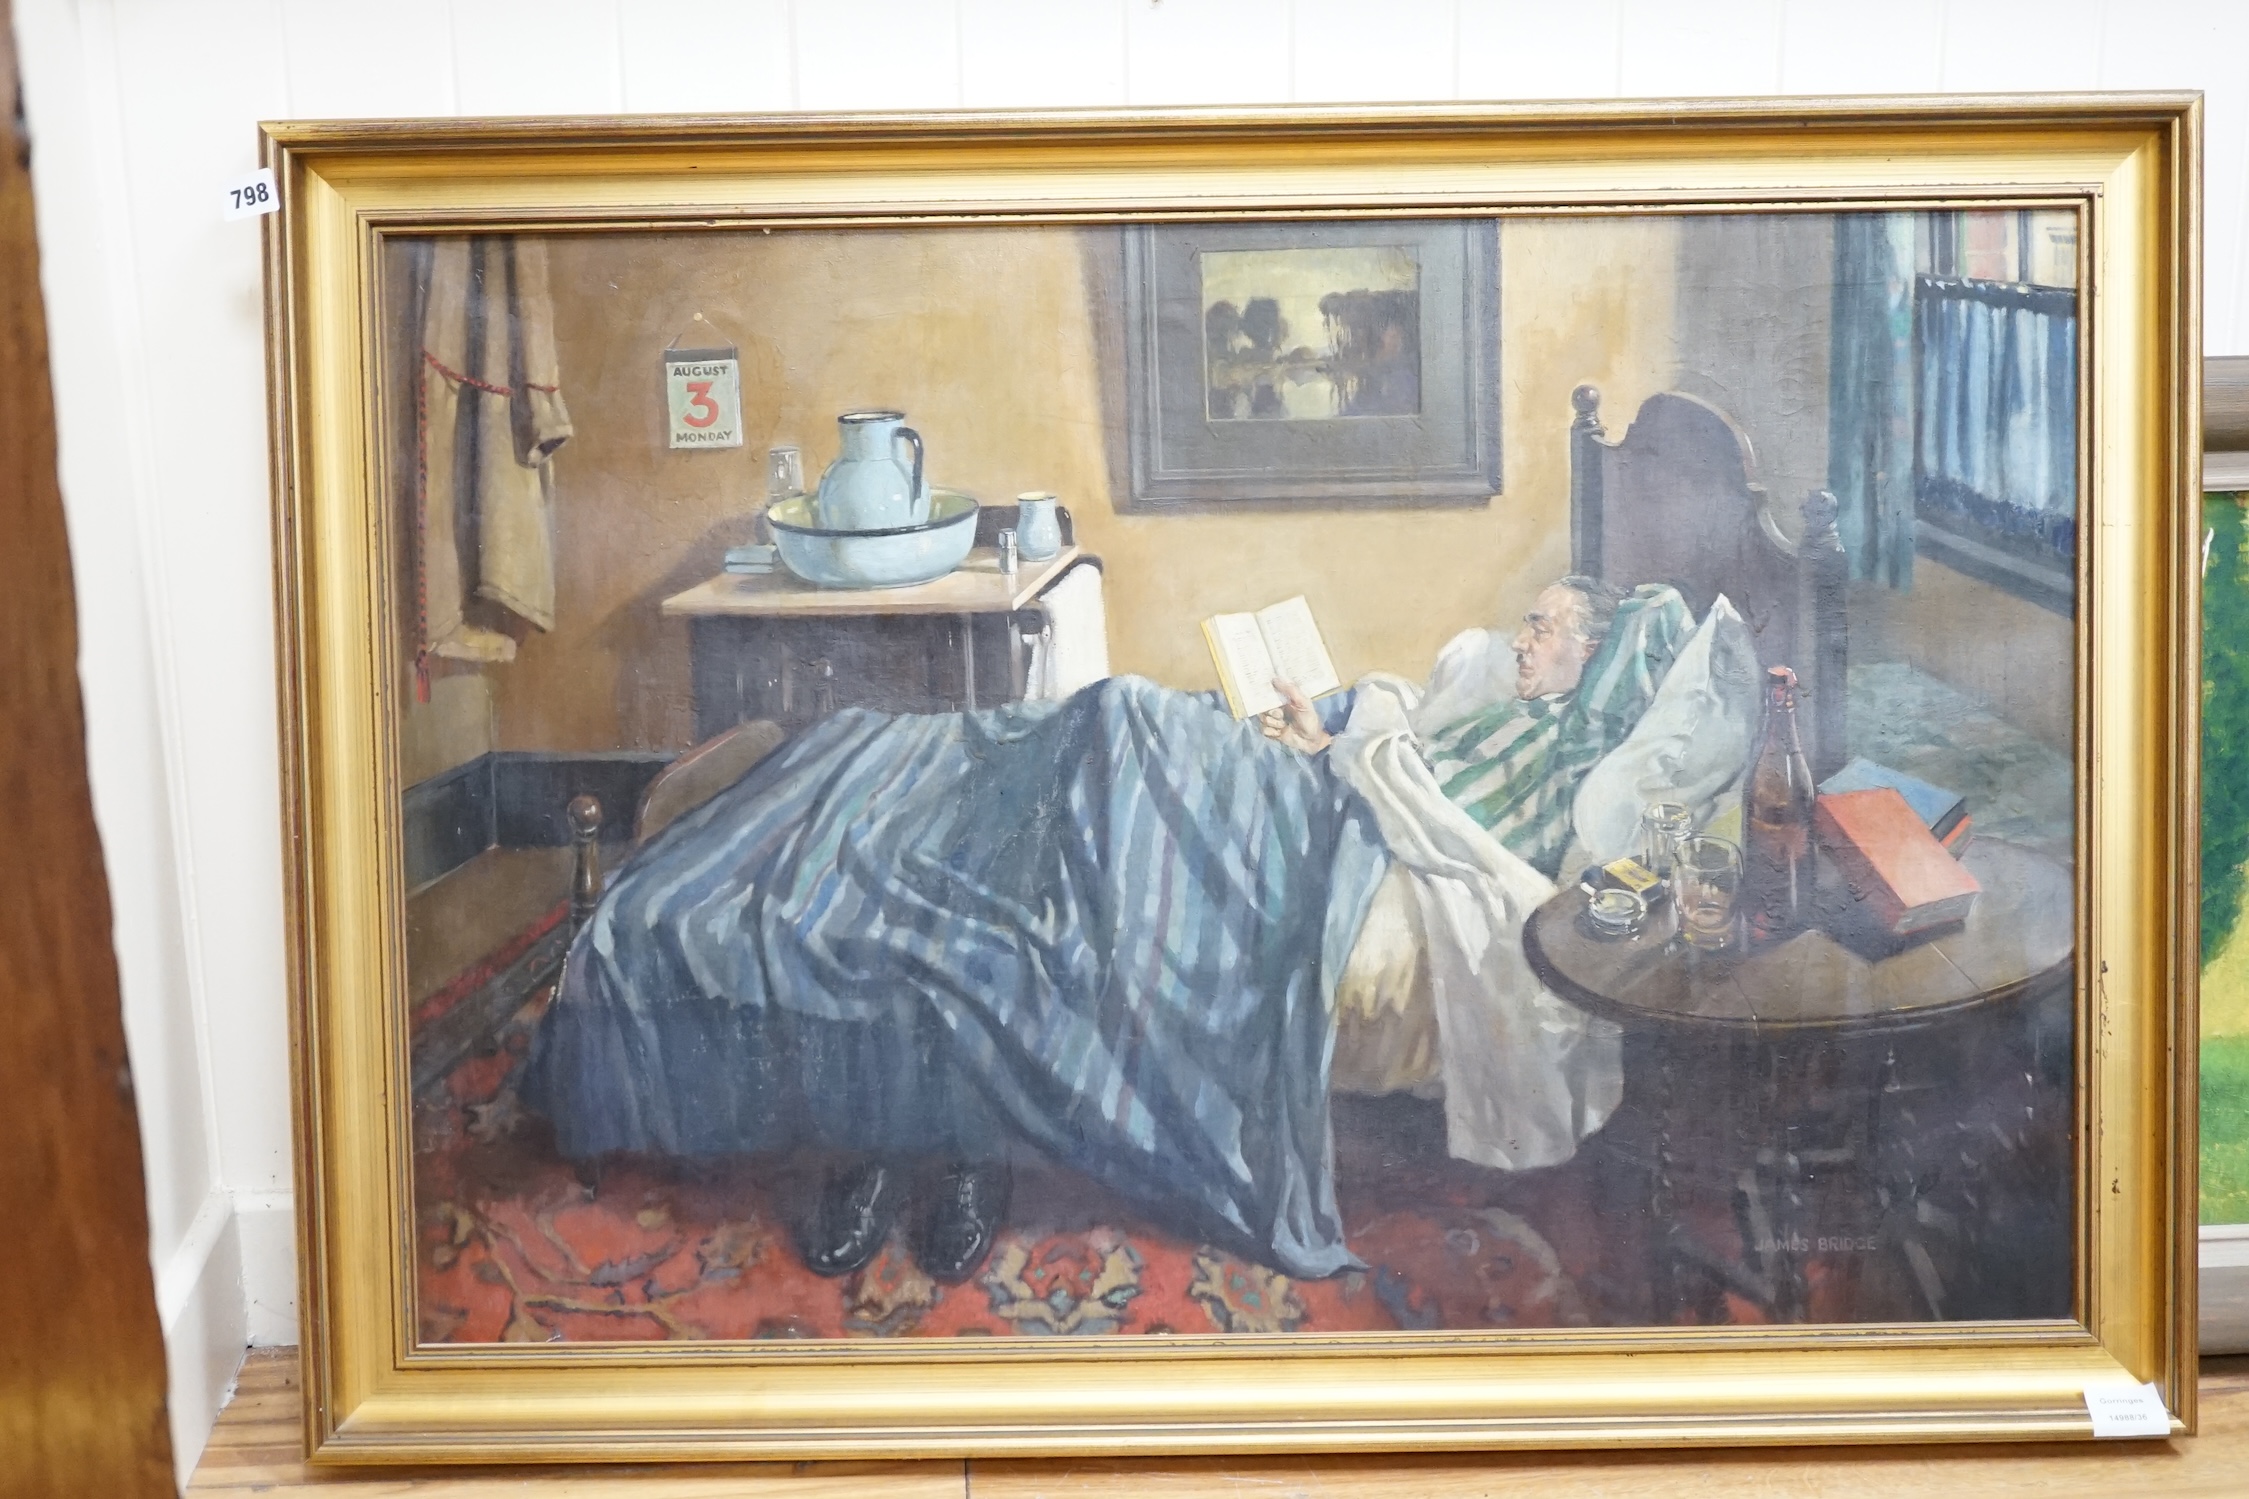 James Bridge, oil on canvas, Interior scene with figure reading, signed, 60 x 90cm, gilt framed. Condition - fair to good